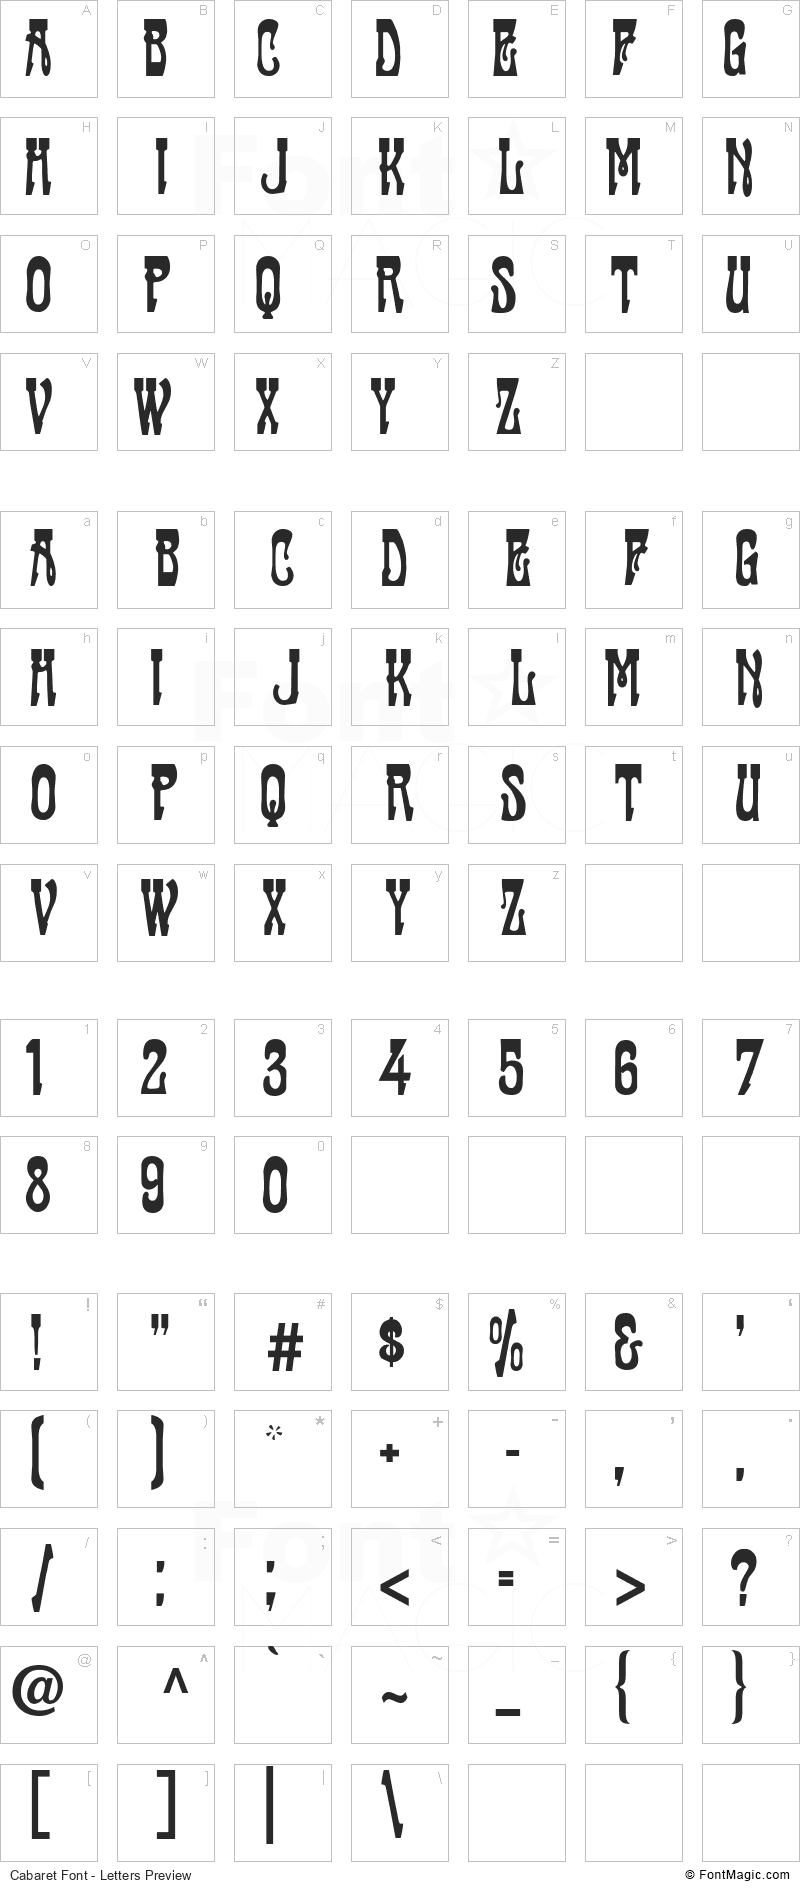 Cabaret Font - All Latters Preview Chart